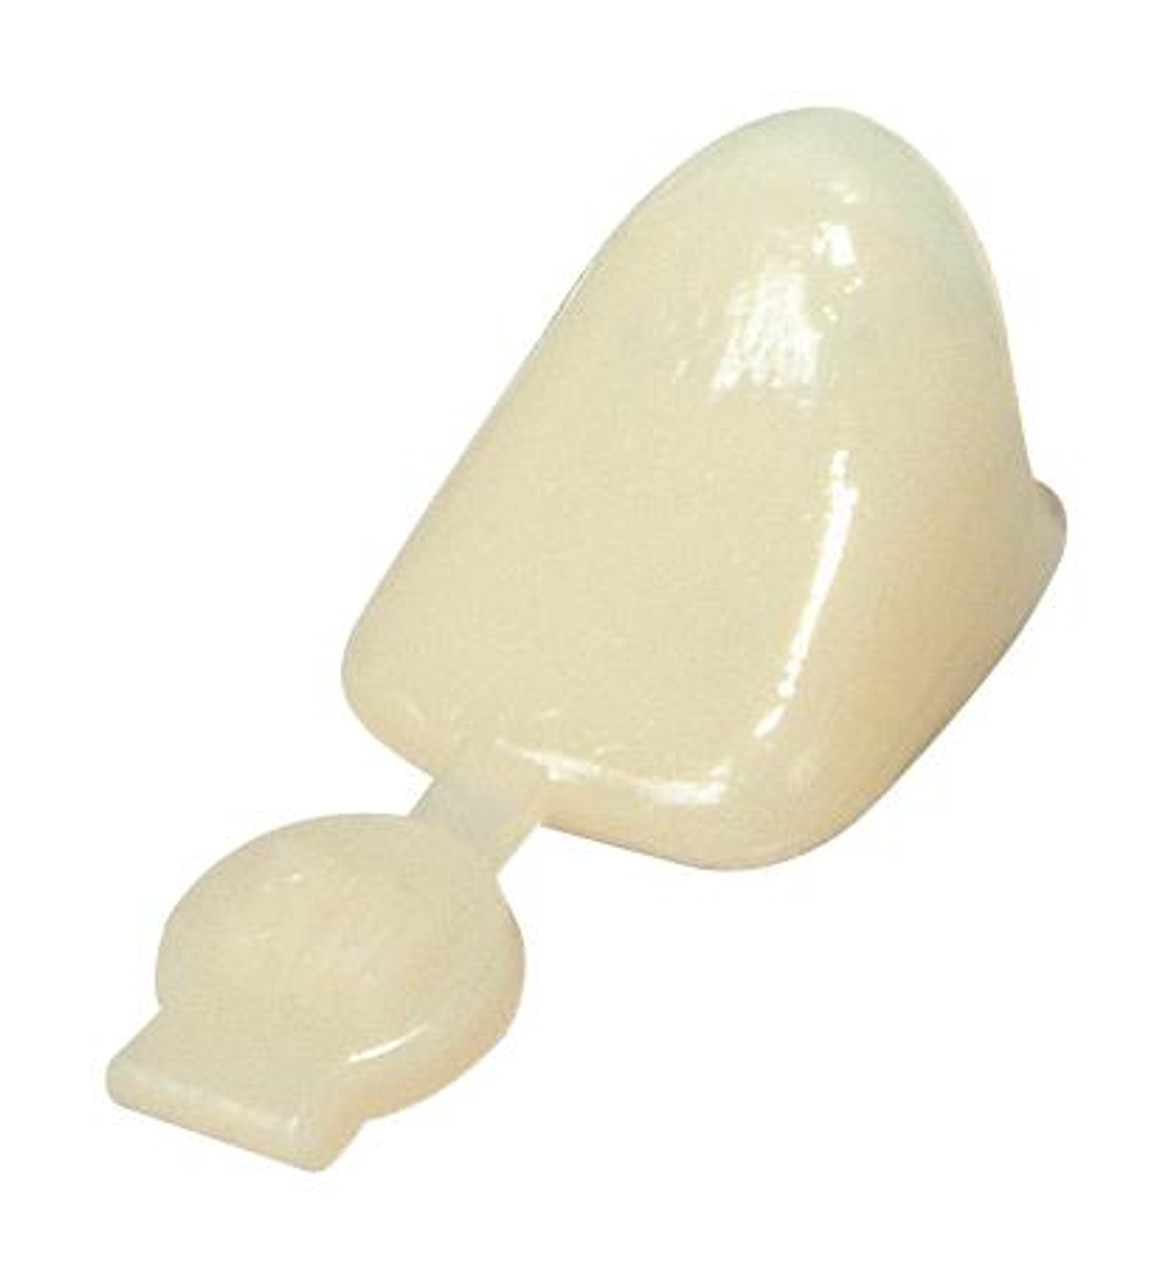 3M Polycarbonate Crowns, 23, Upper Right Lateral, 5 Crowns